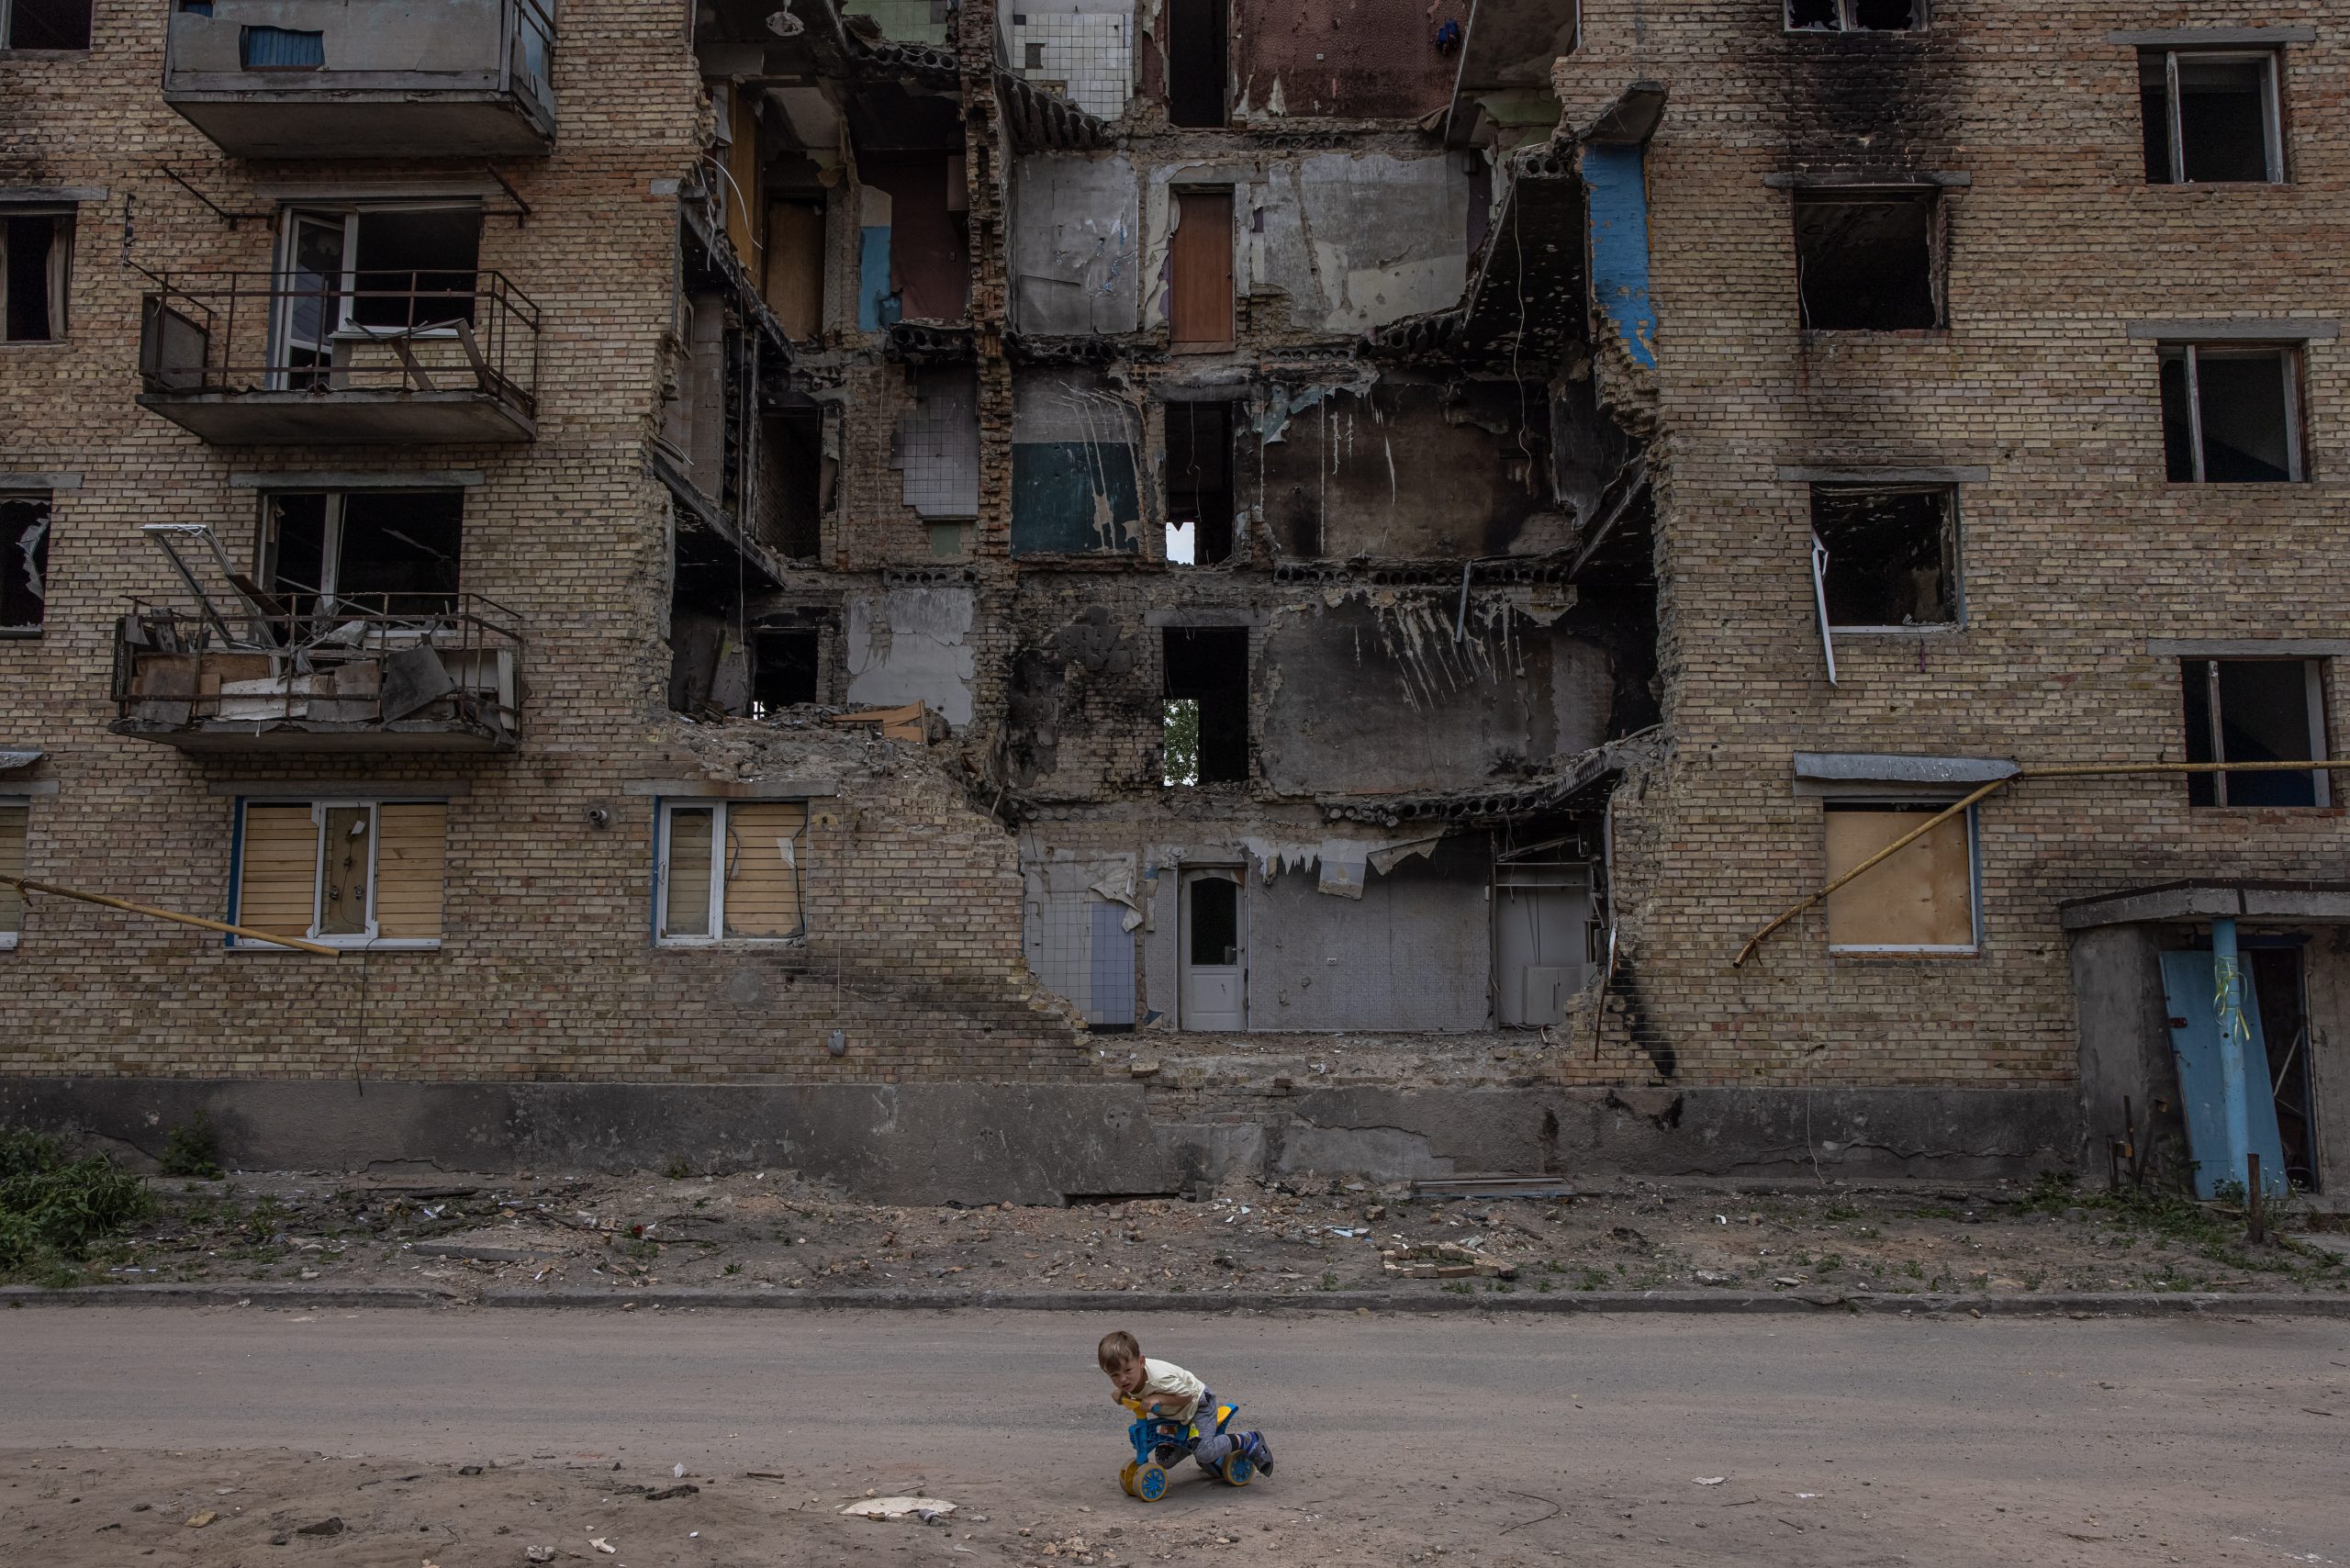 epa10018734 A child plays in front of a damaged residential building in Horenka, Kyiv (Kiev) region, Ukraine, 17 June 2022. Several towns and villages in the northern part of the Kyiv region became battlefields, heavily shelled, causing death and damage when Russian troops tried to reach the Ukrainian capital Kyiv in February and March 2022. Russian troops on 24 February entered Ukrainian territory, starting a conflict that has provoked destruction and a humanitarian crisis.  EPA/ROMAN PILIPEY